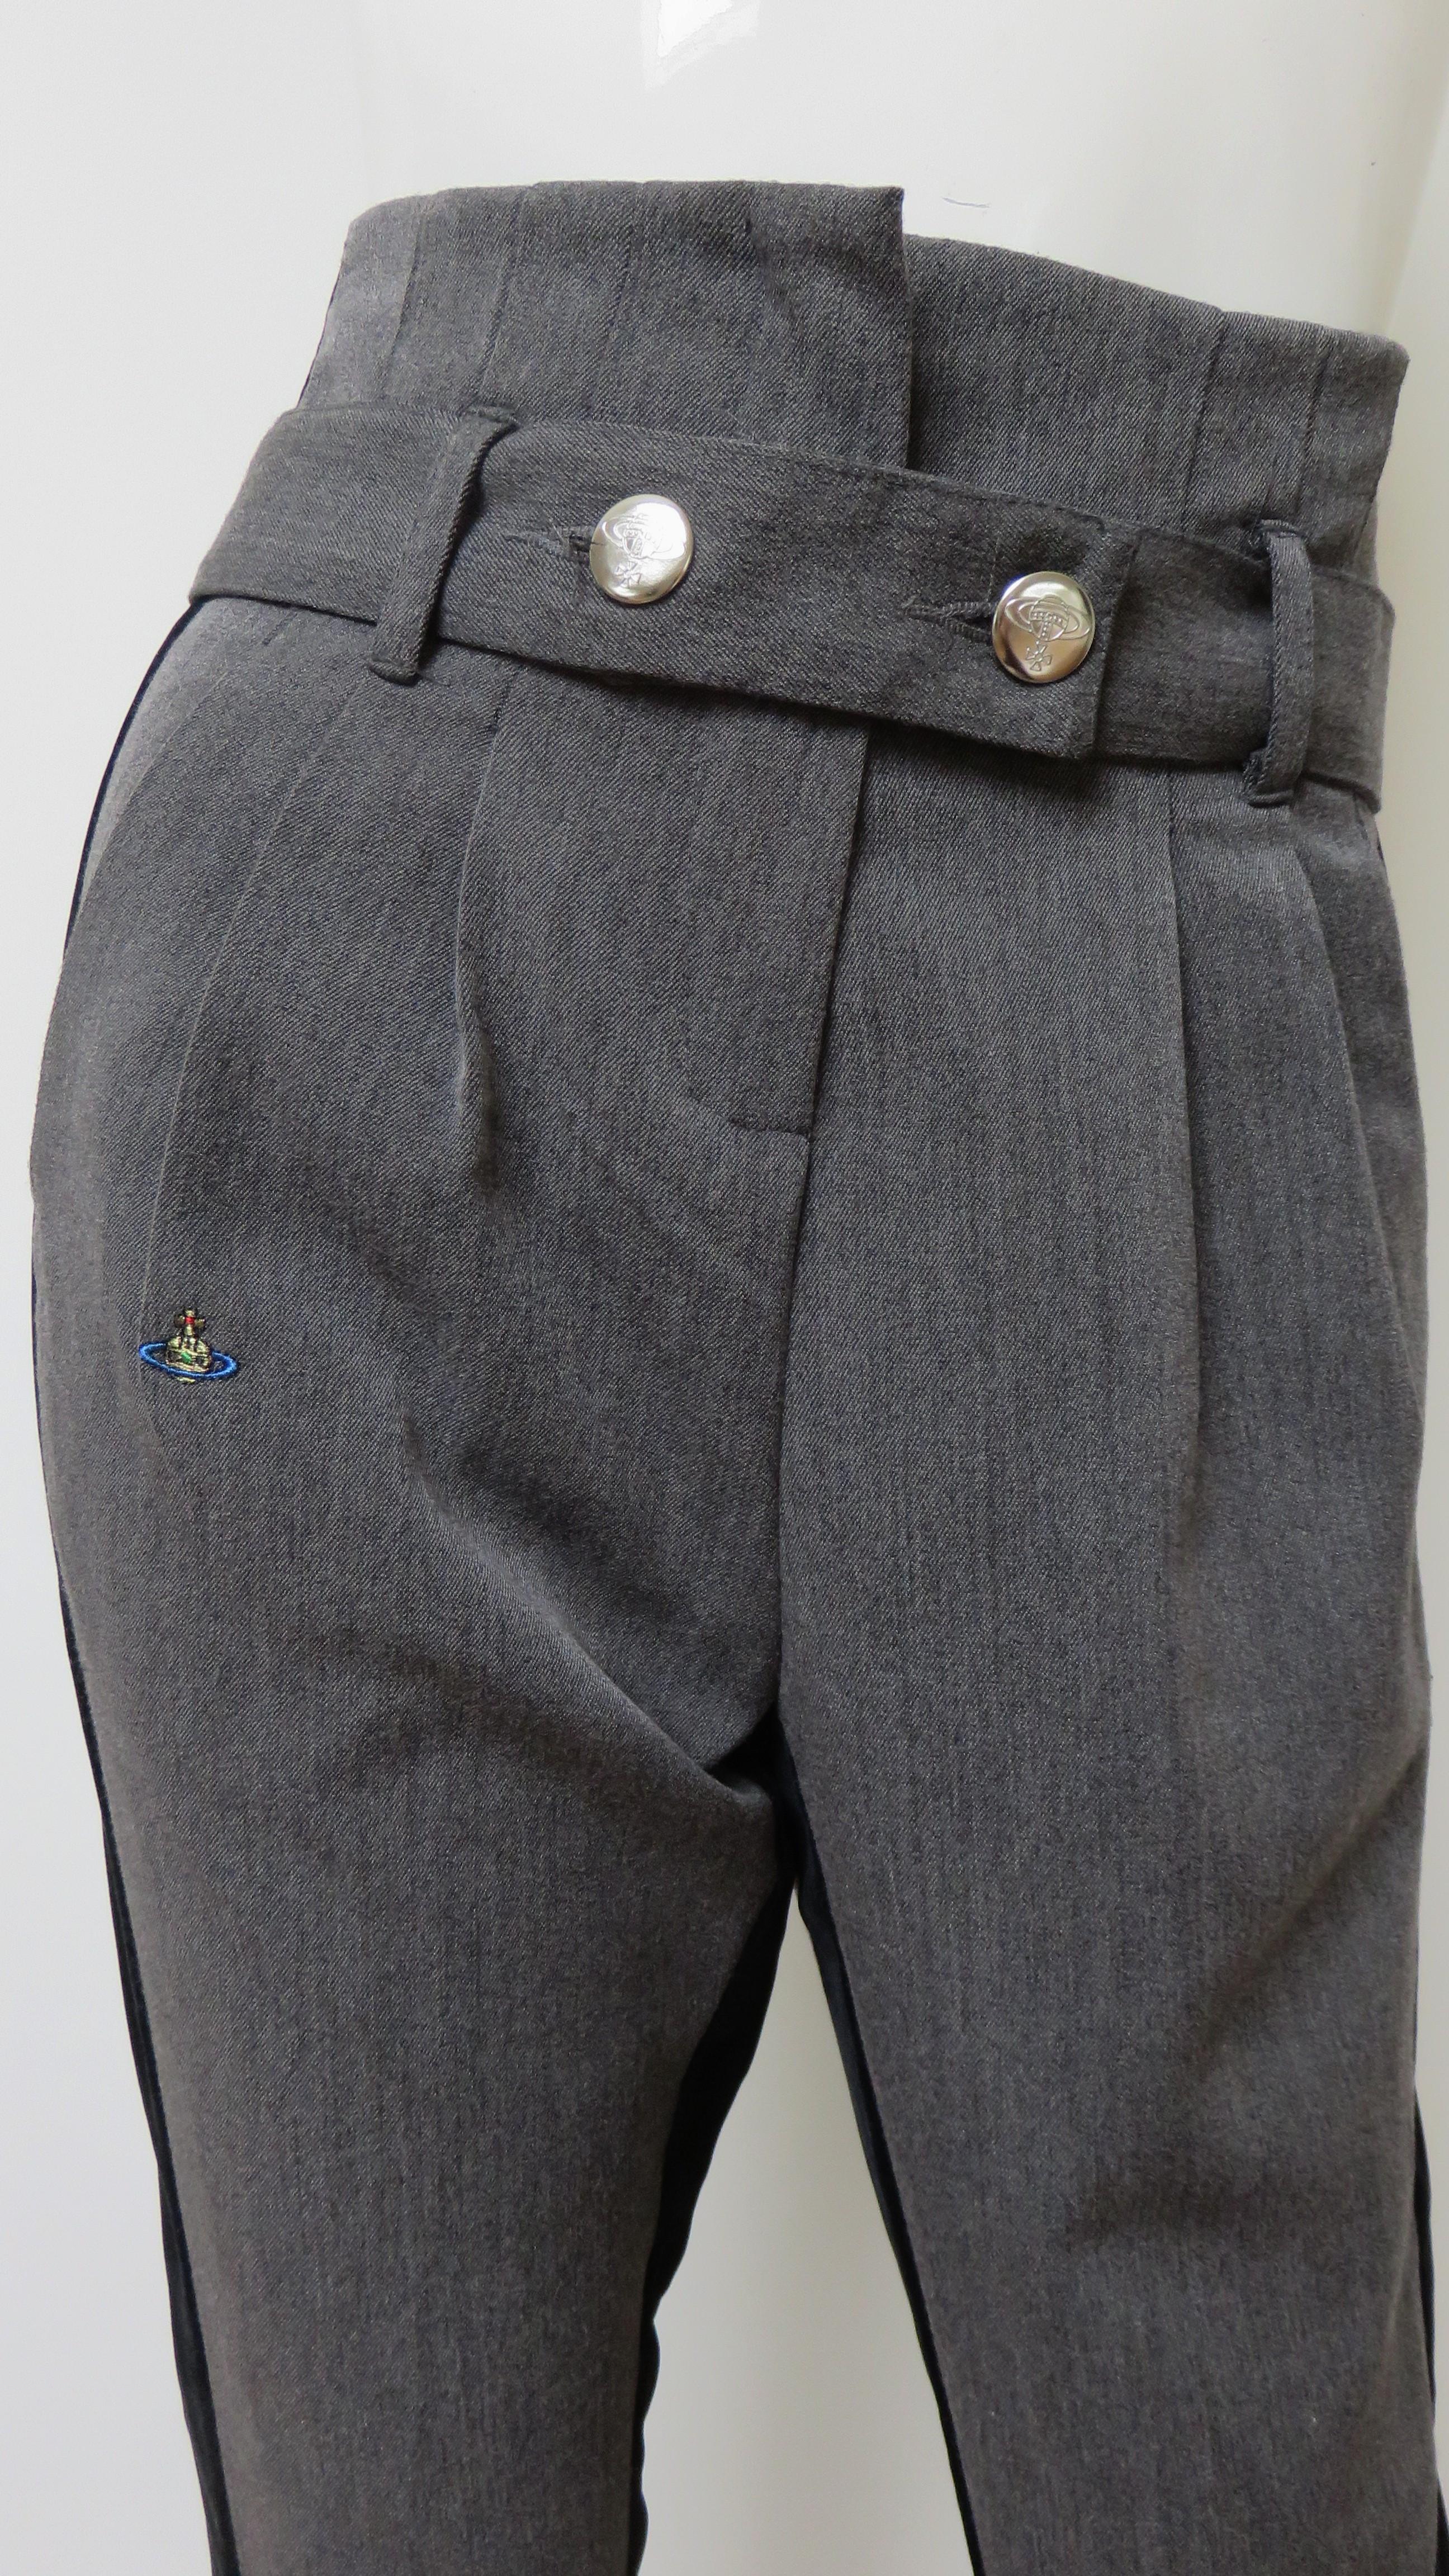 Vivienne Westwood Color Block Pants with Black Trim In Good Condition For Sale In Water Mill, NY